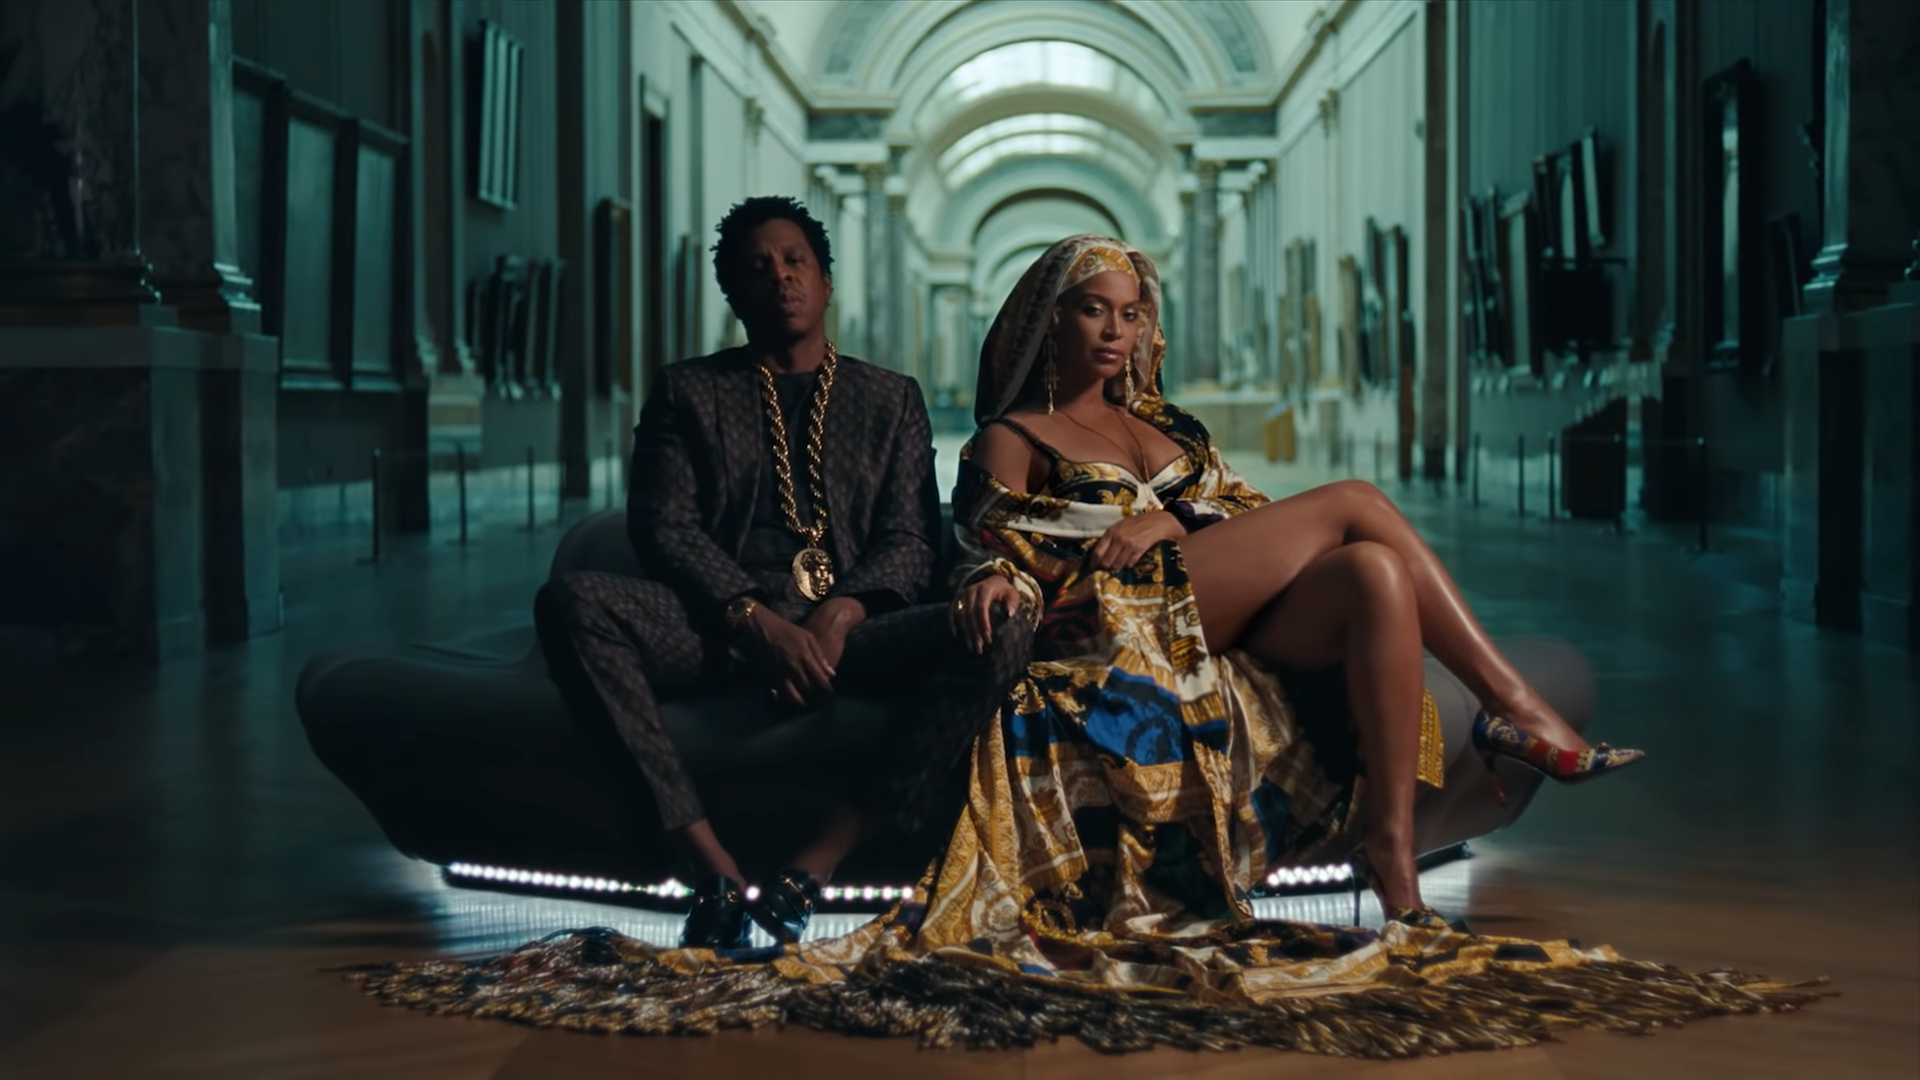 The Carters dropped an entire surprise joint album "Everything is Love" and video for "Ape Sh*t"